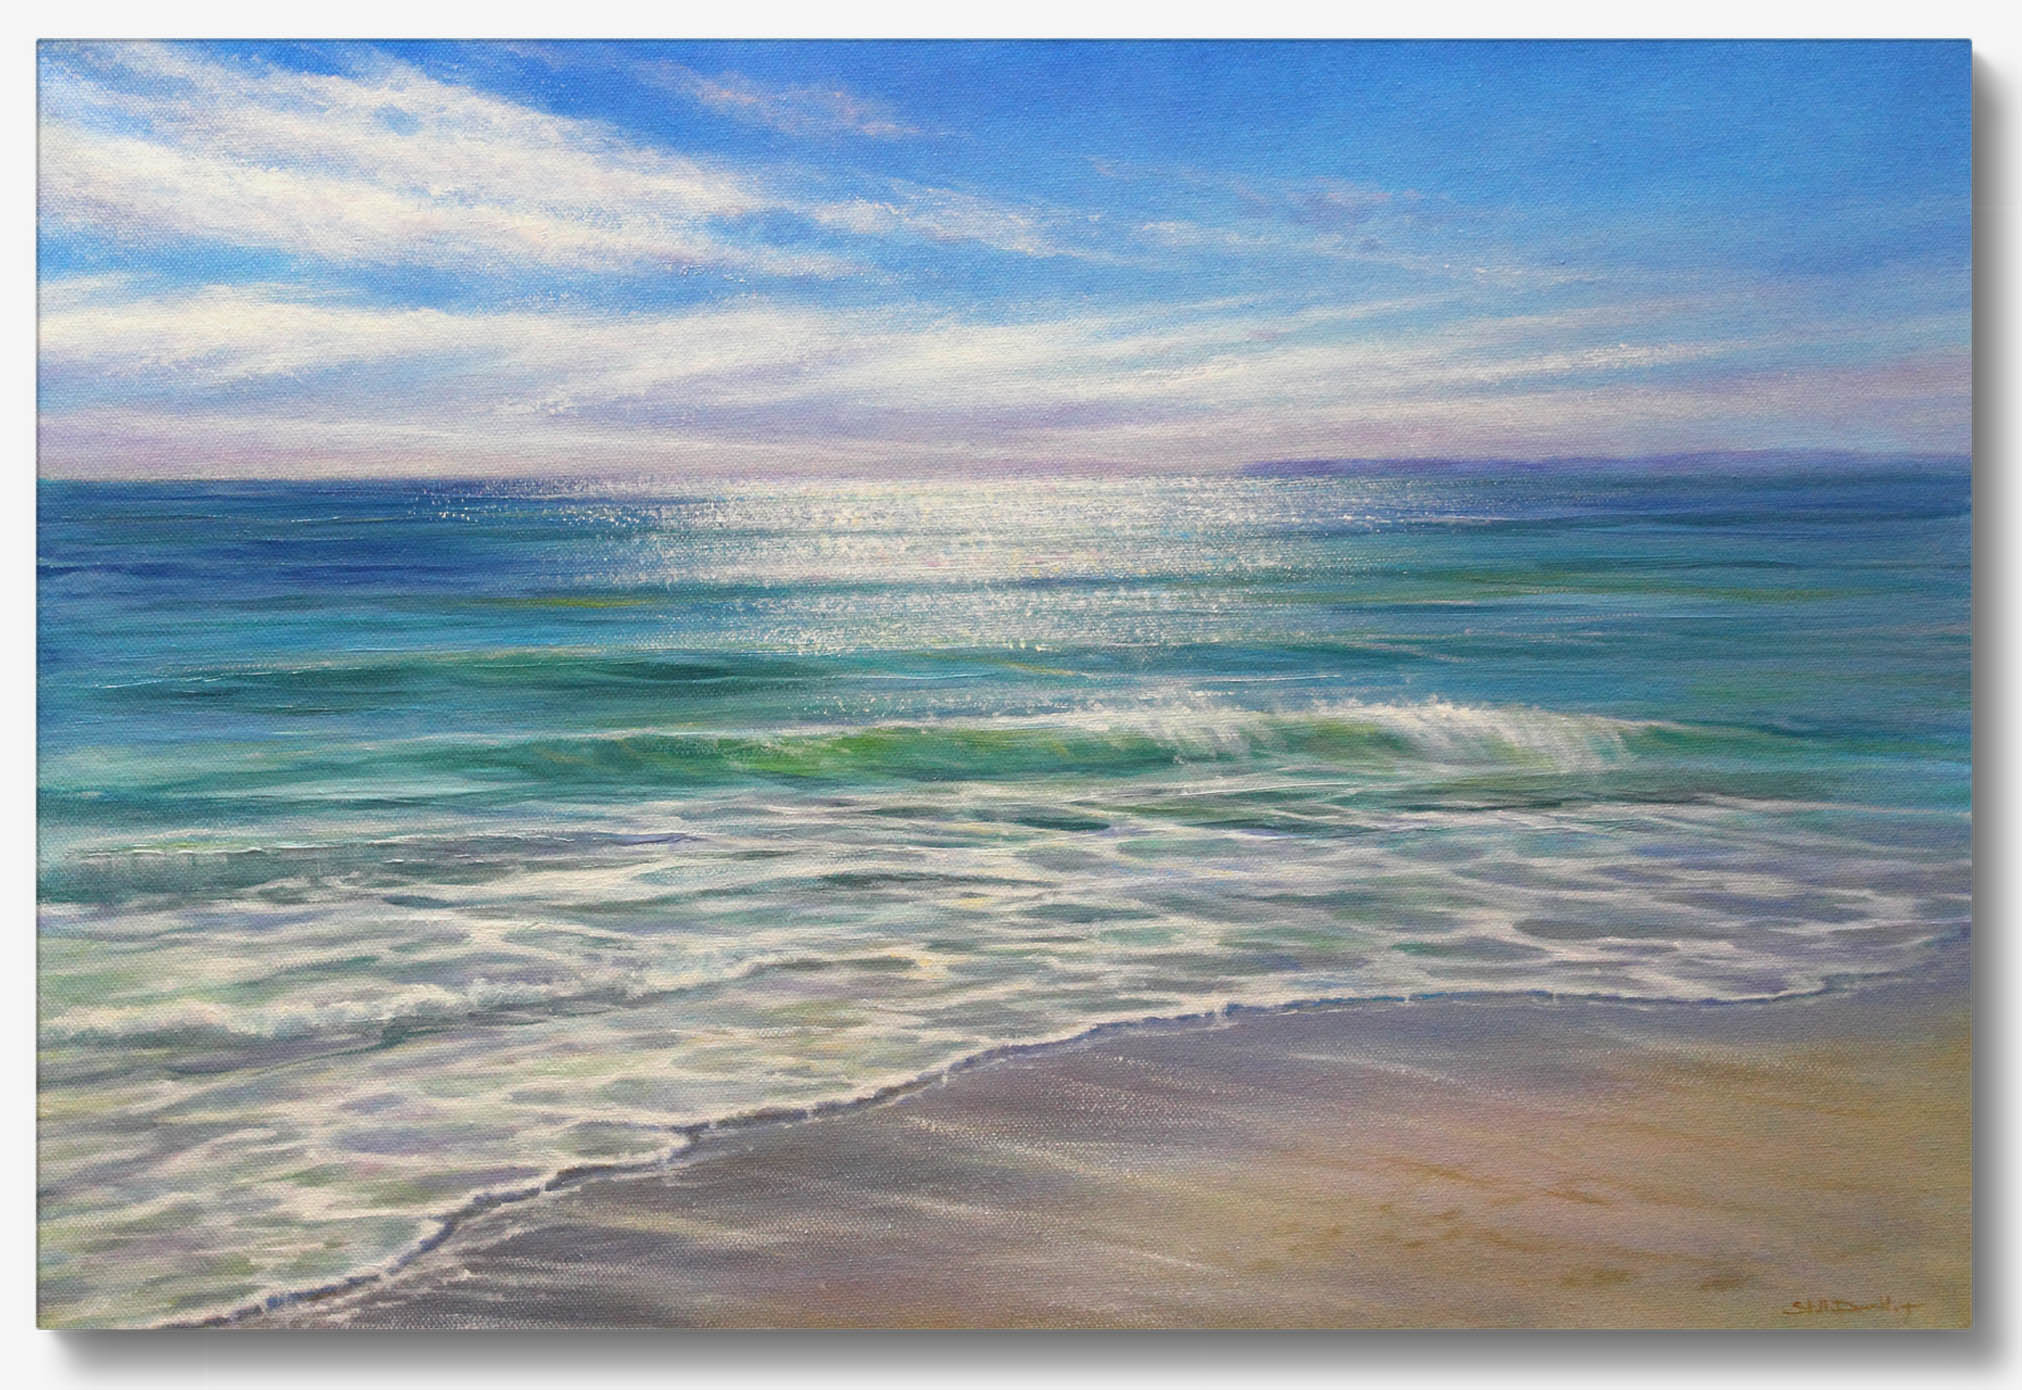 The Peaceful Shore giclee print on canvas for sale